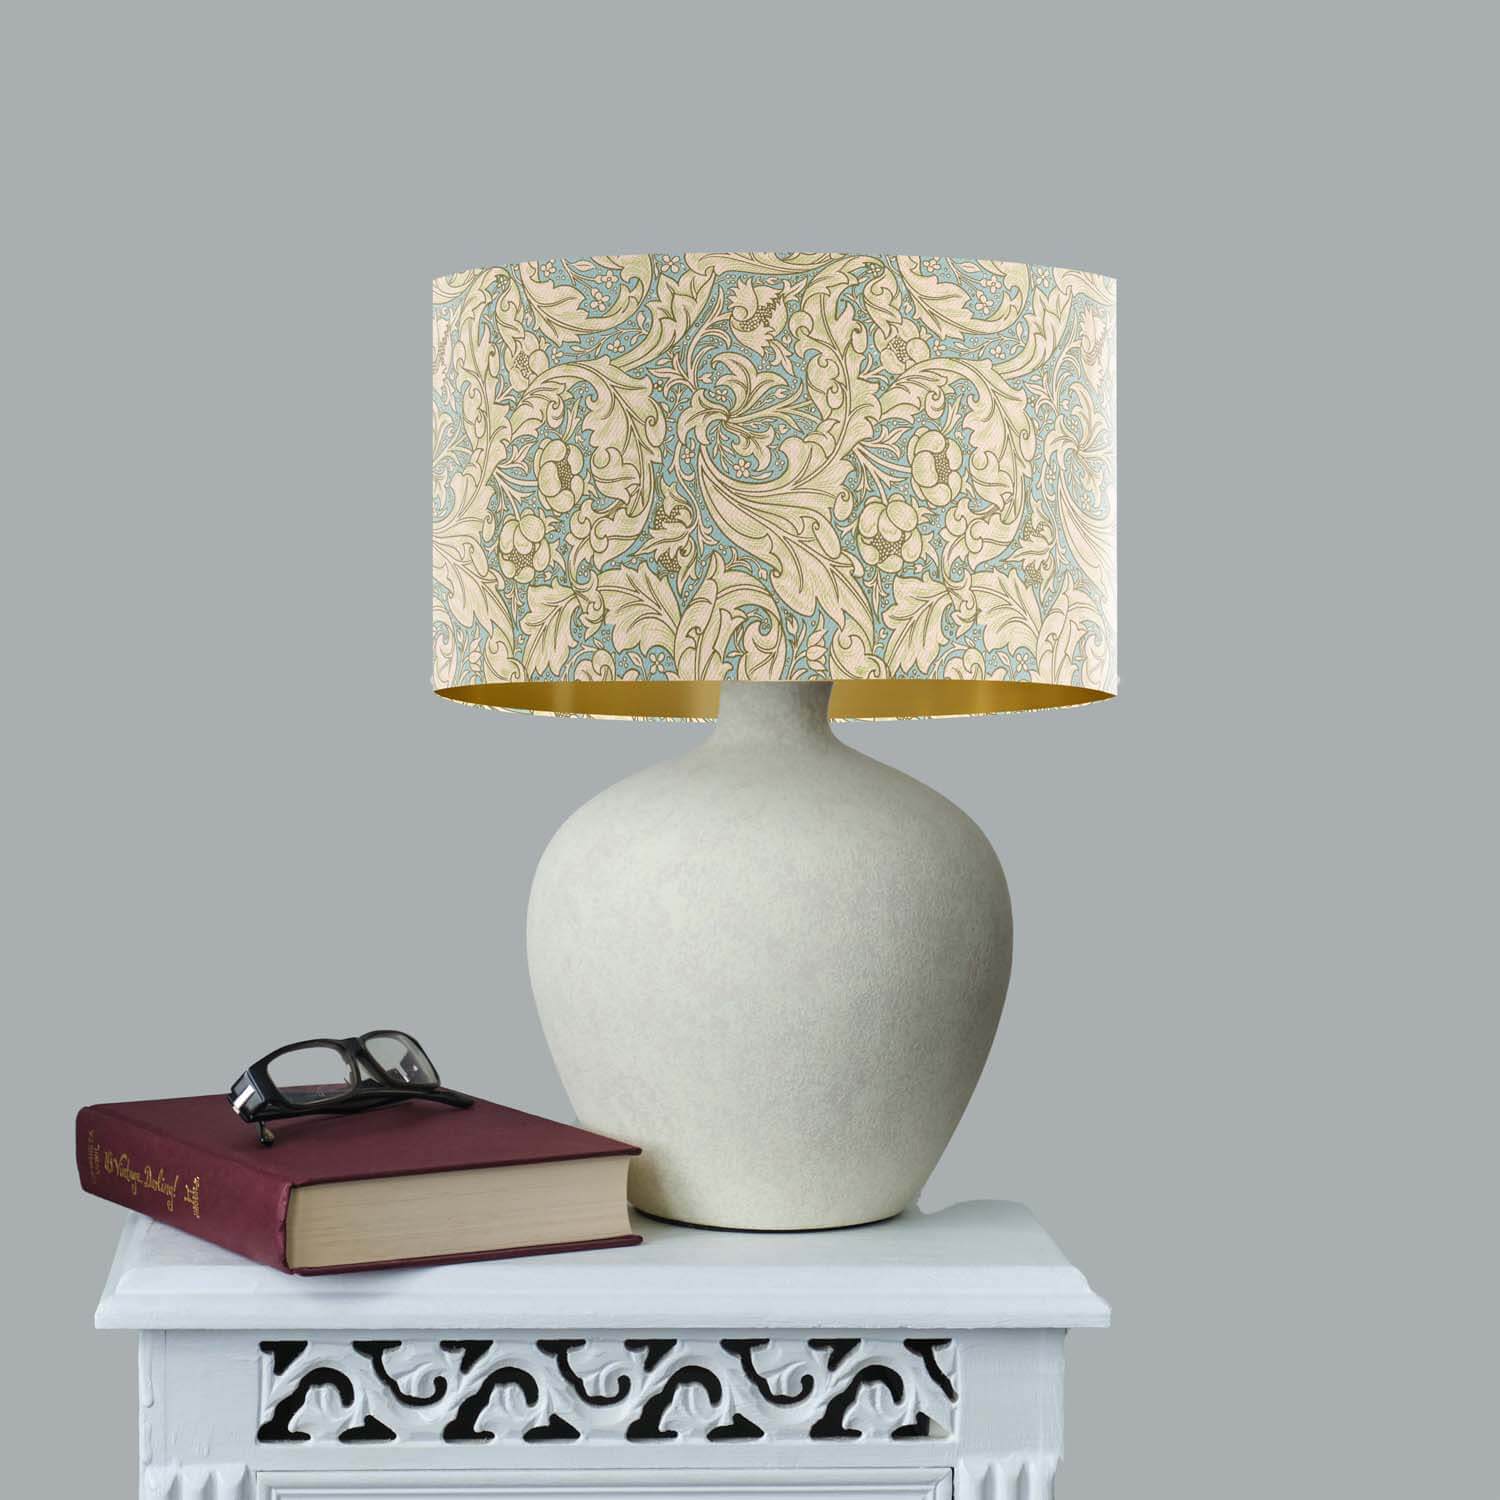 Bachelor Buttons - William Morris Gallery Lampshade